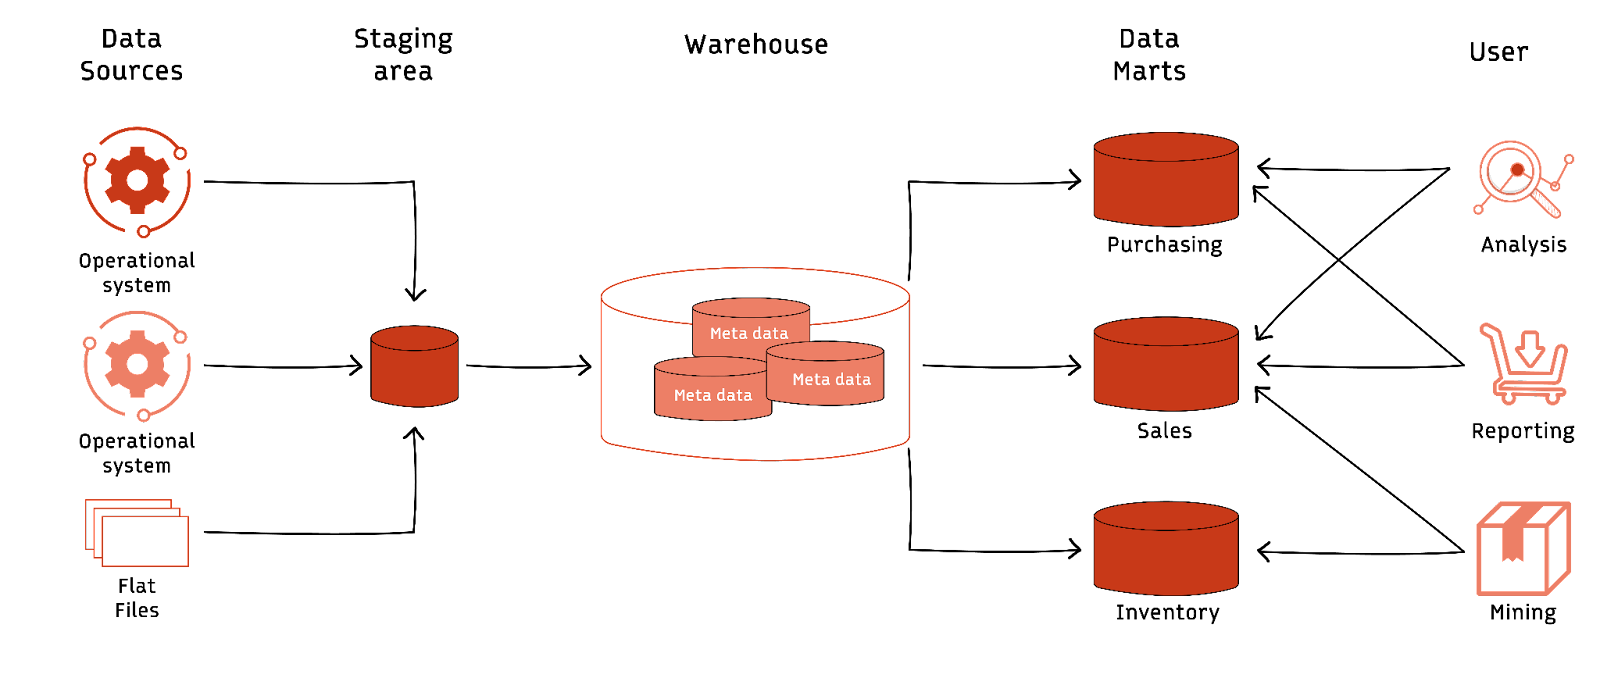 The diagram depicts a high-level view of the data warehouse architecture